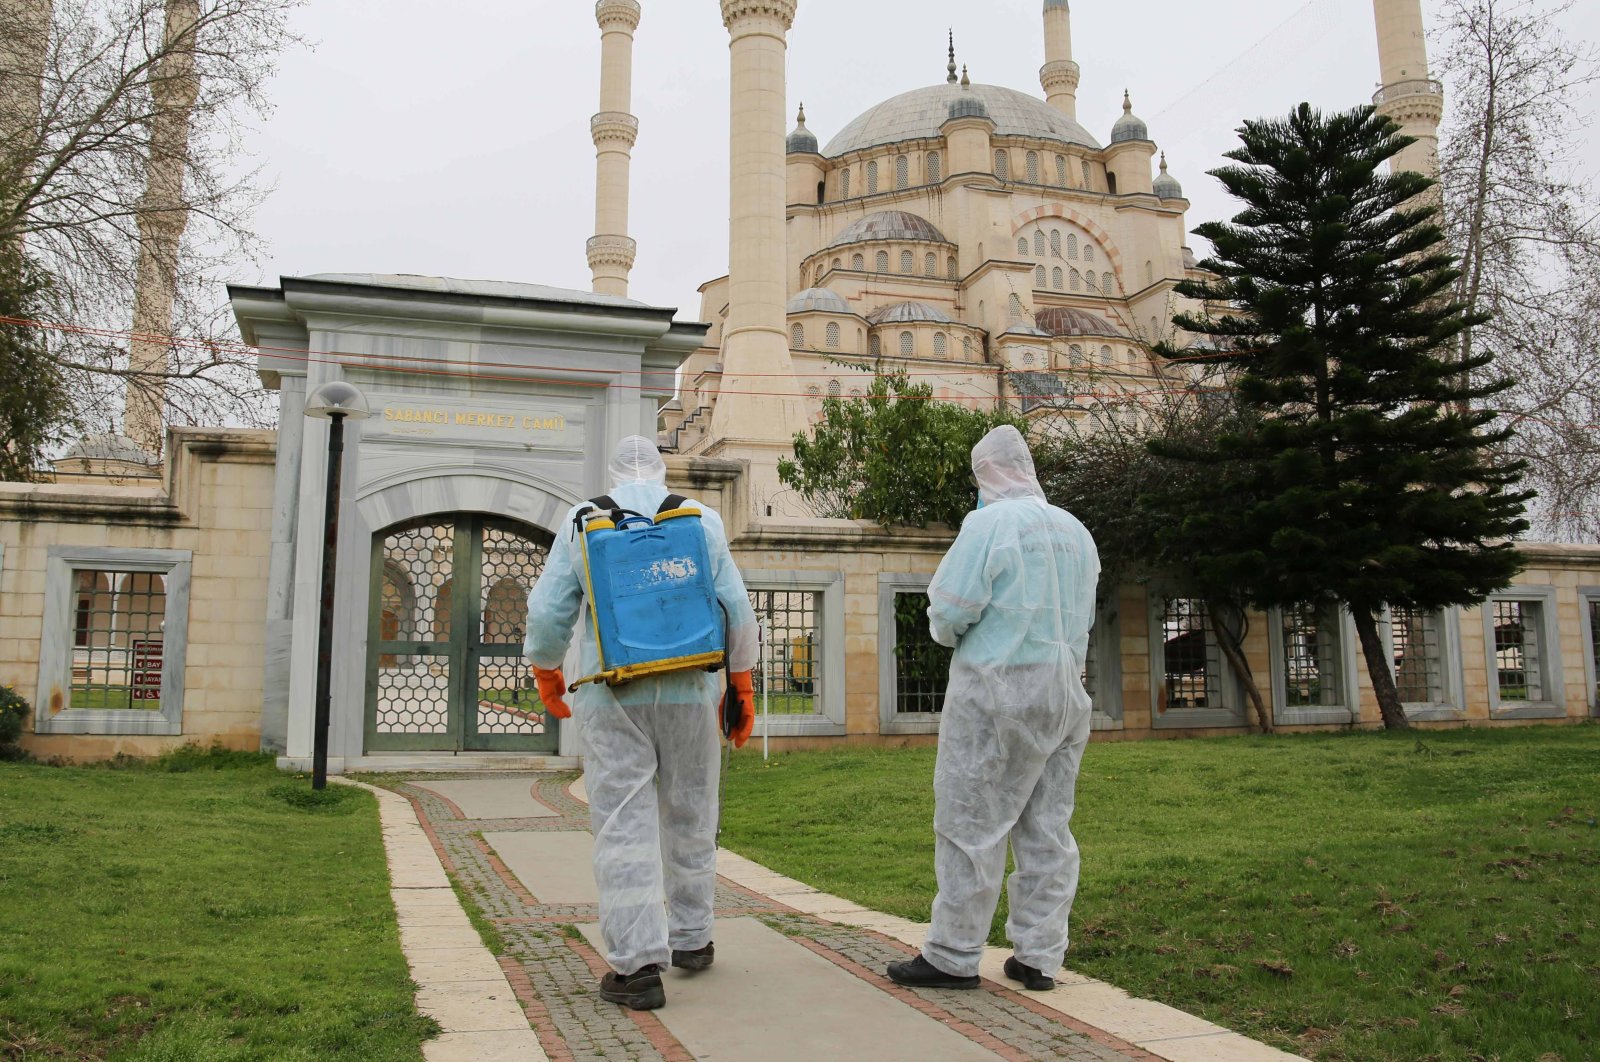 Men wearing protective suits spray disinfectant at a mosque amid the spread of the coronavirus (COVID-19) in Adana, March 12, 2020. (Photo by İHA)